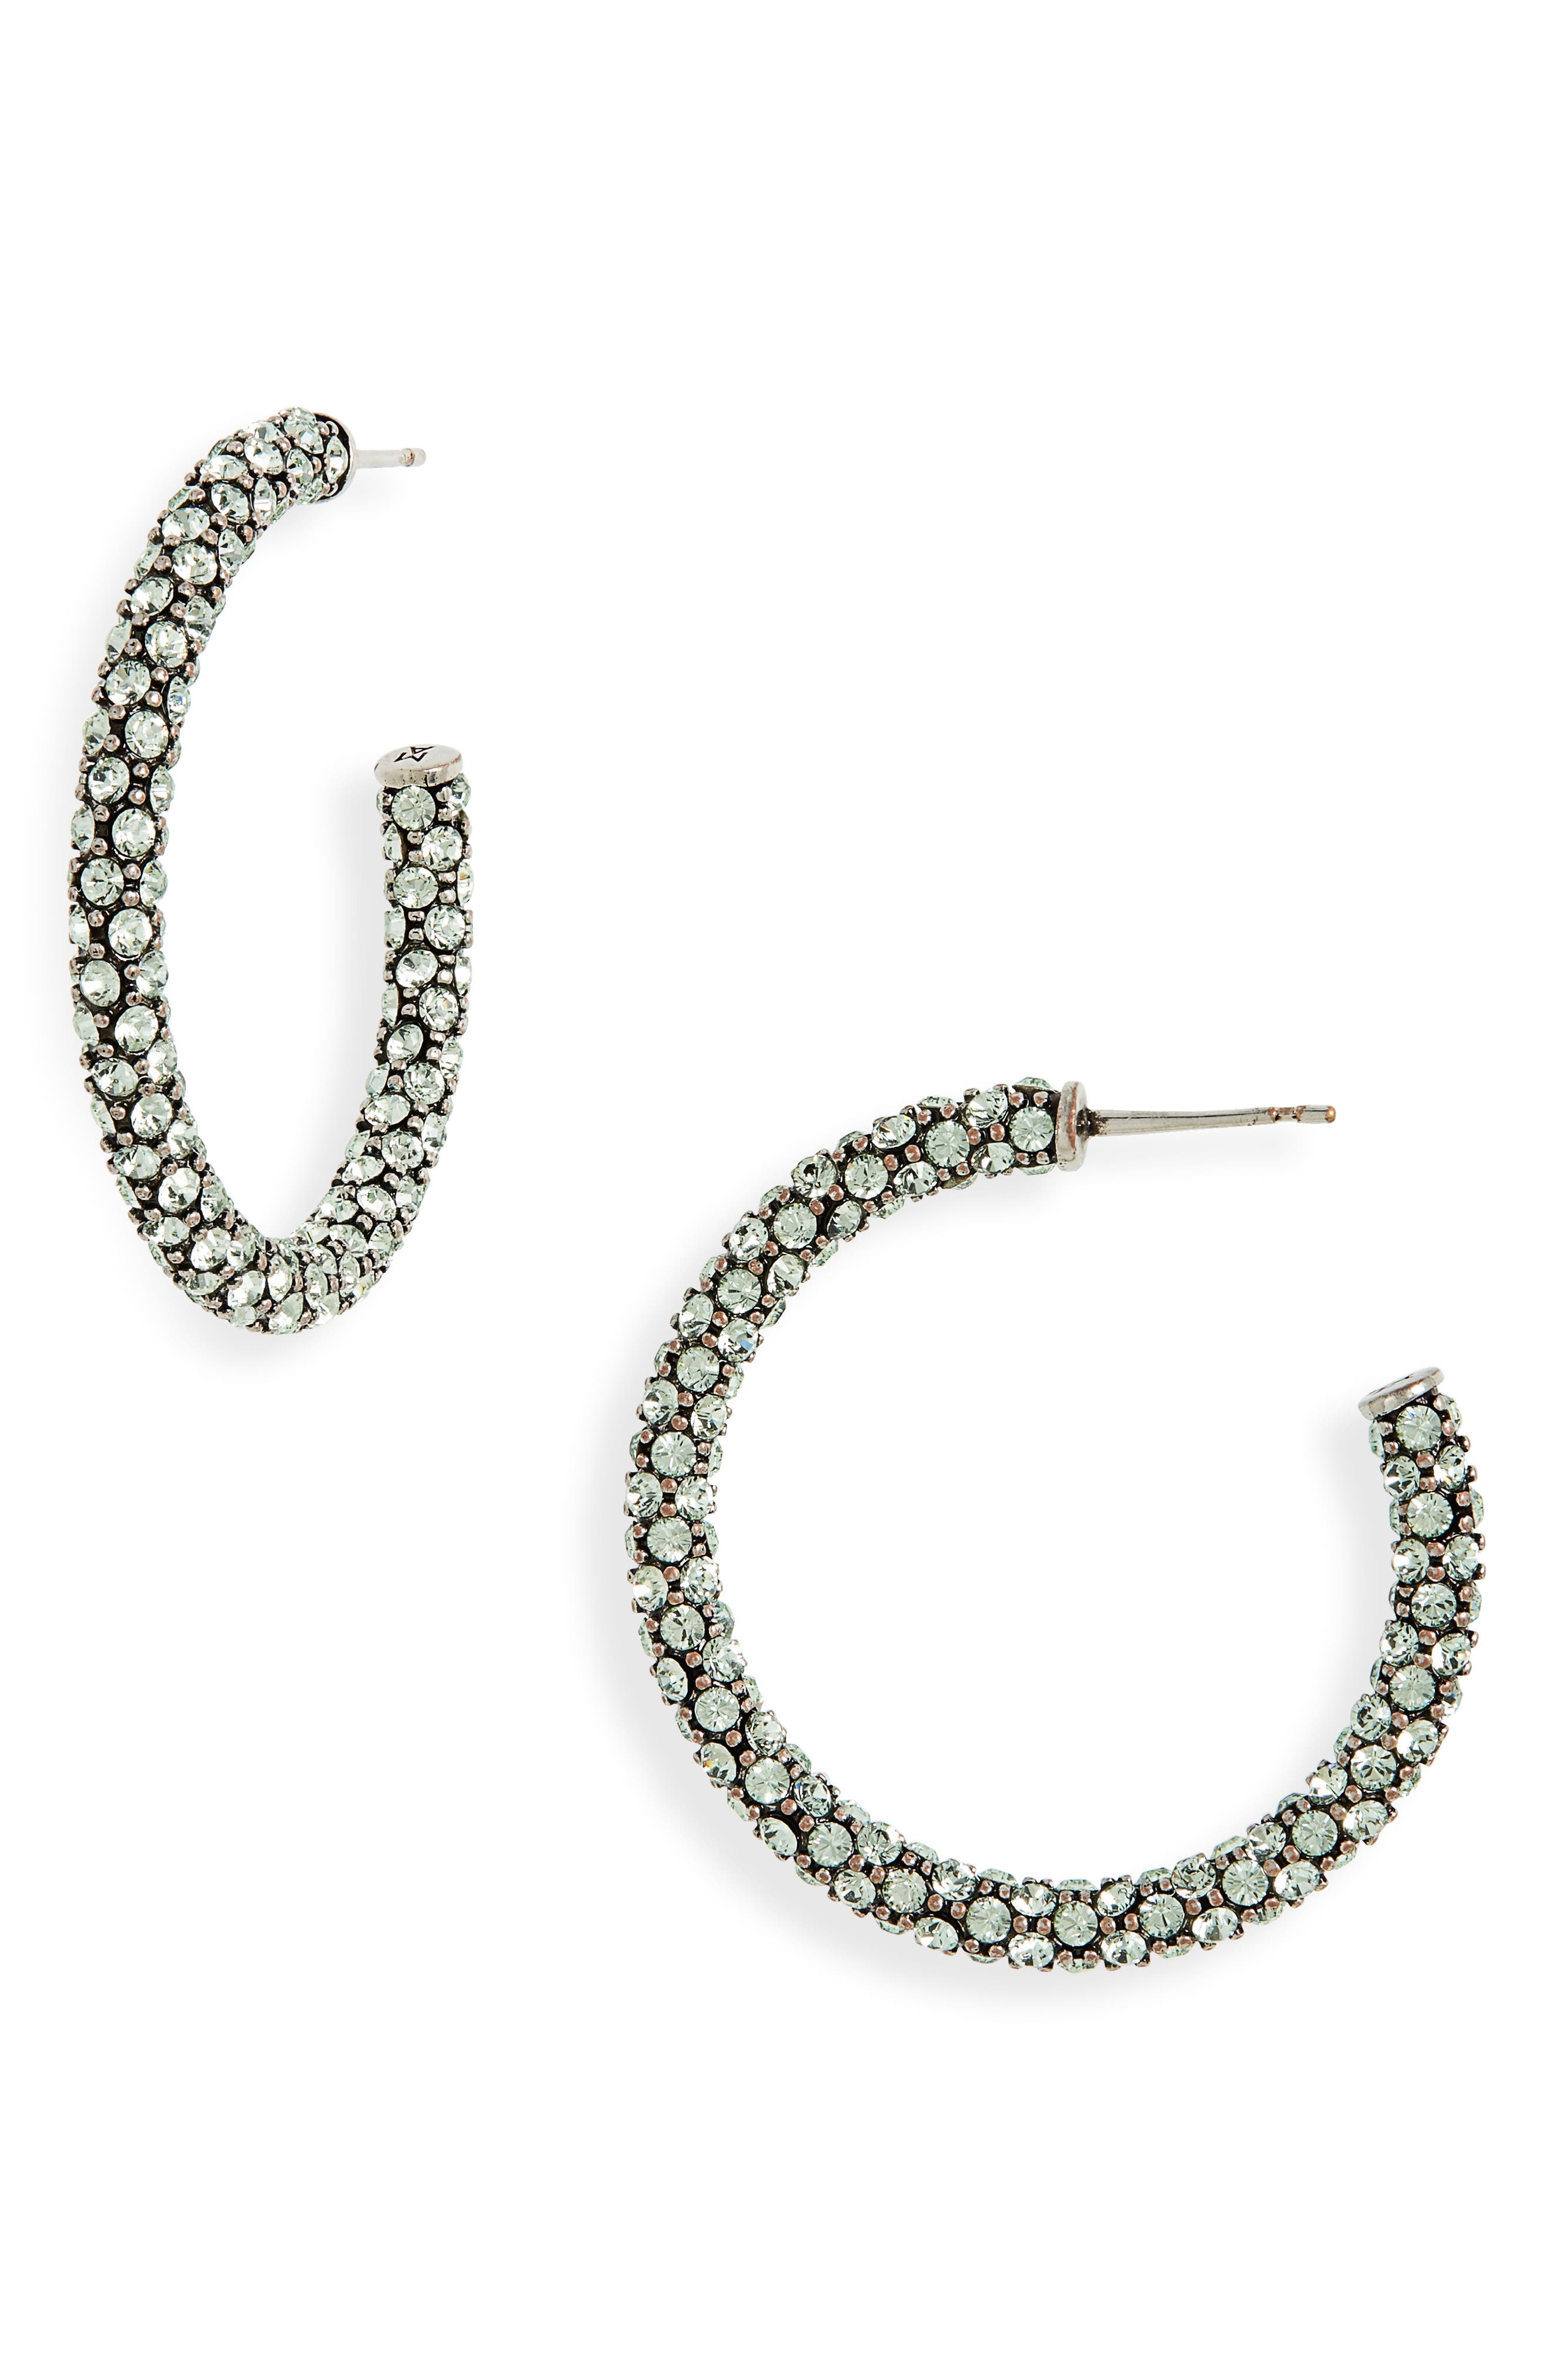 Amina Muaddi Small Cameron Hoop Earrings in Chrysolite Crystals Antique Sb at Nordstrom